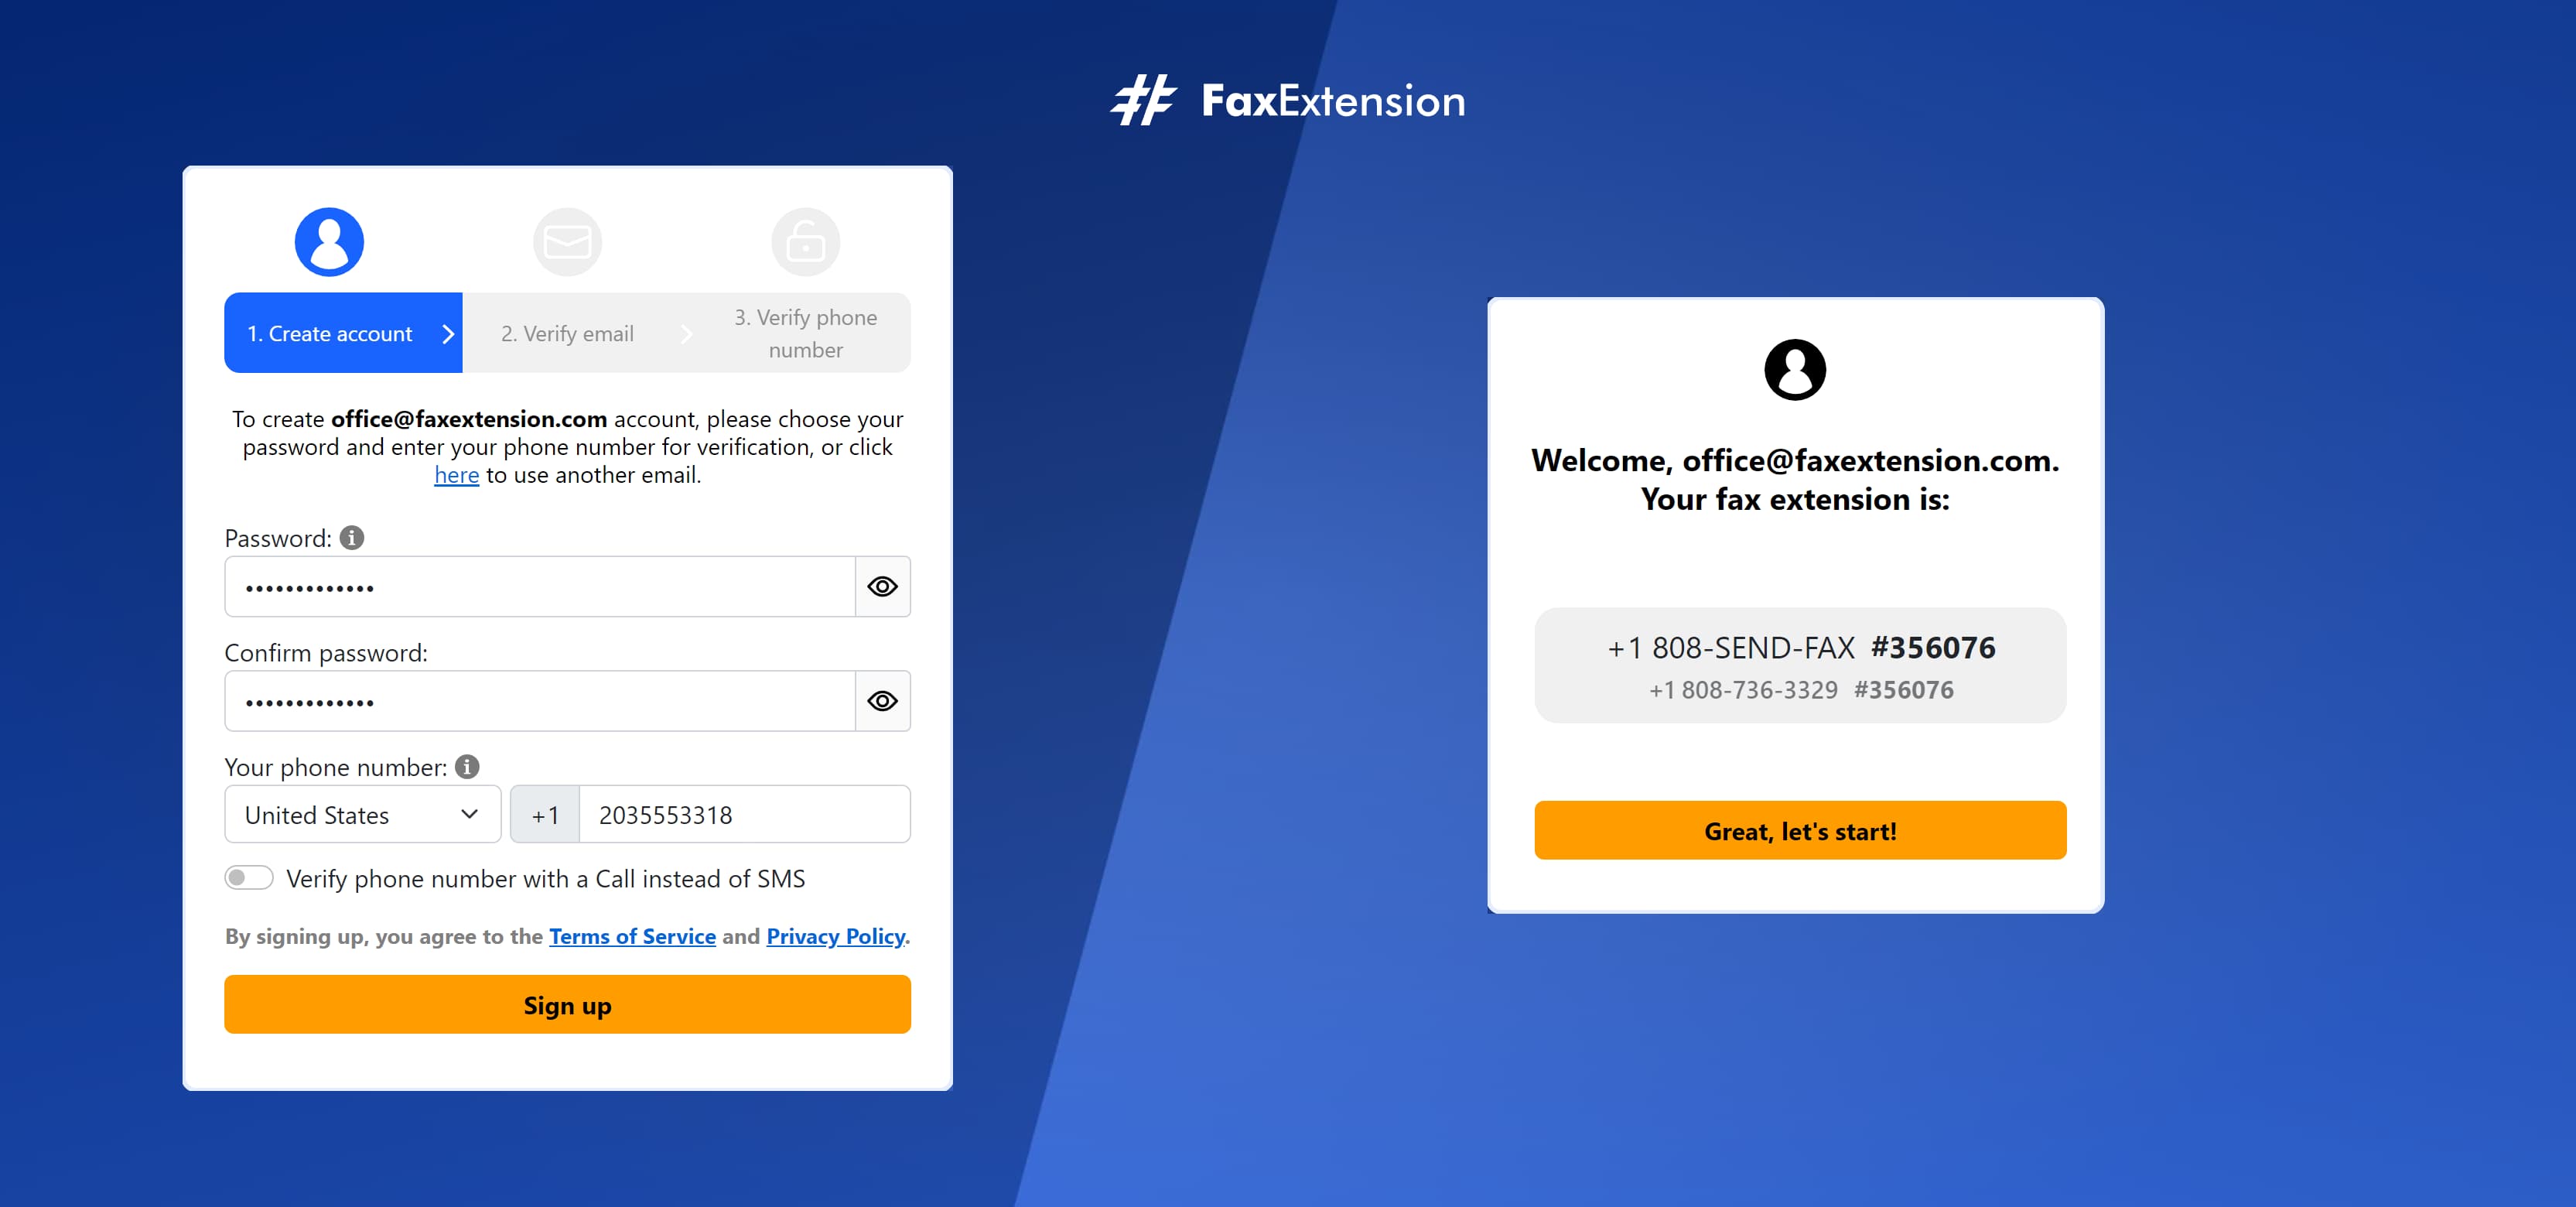 Get your own free fax extension number instantly